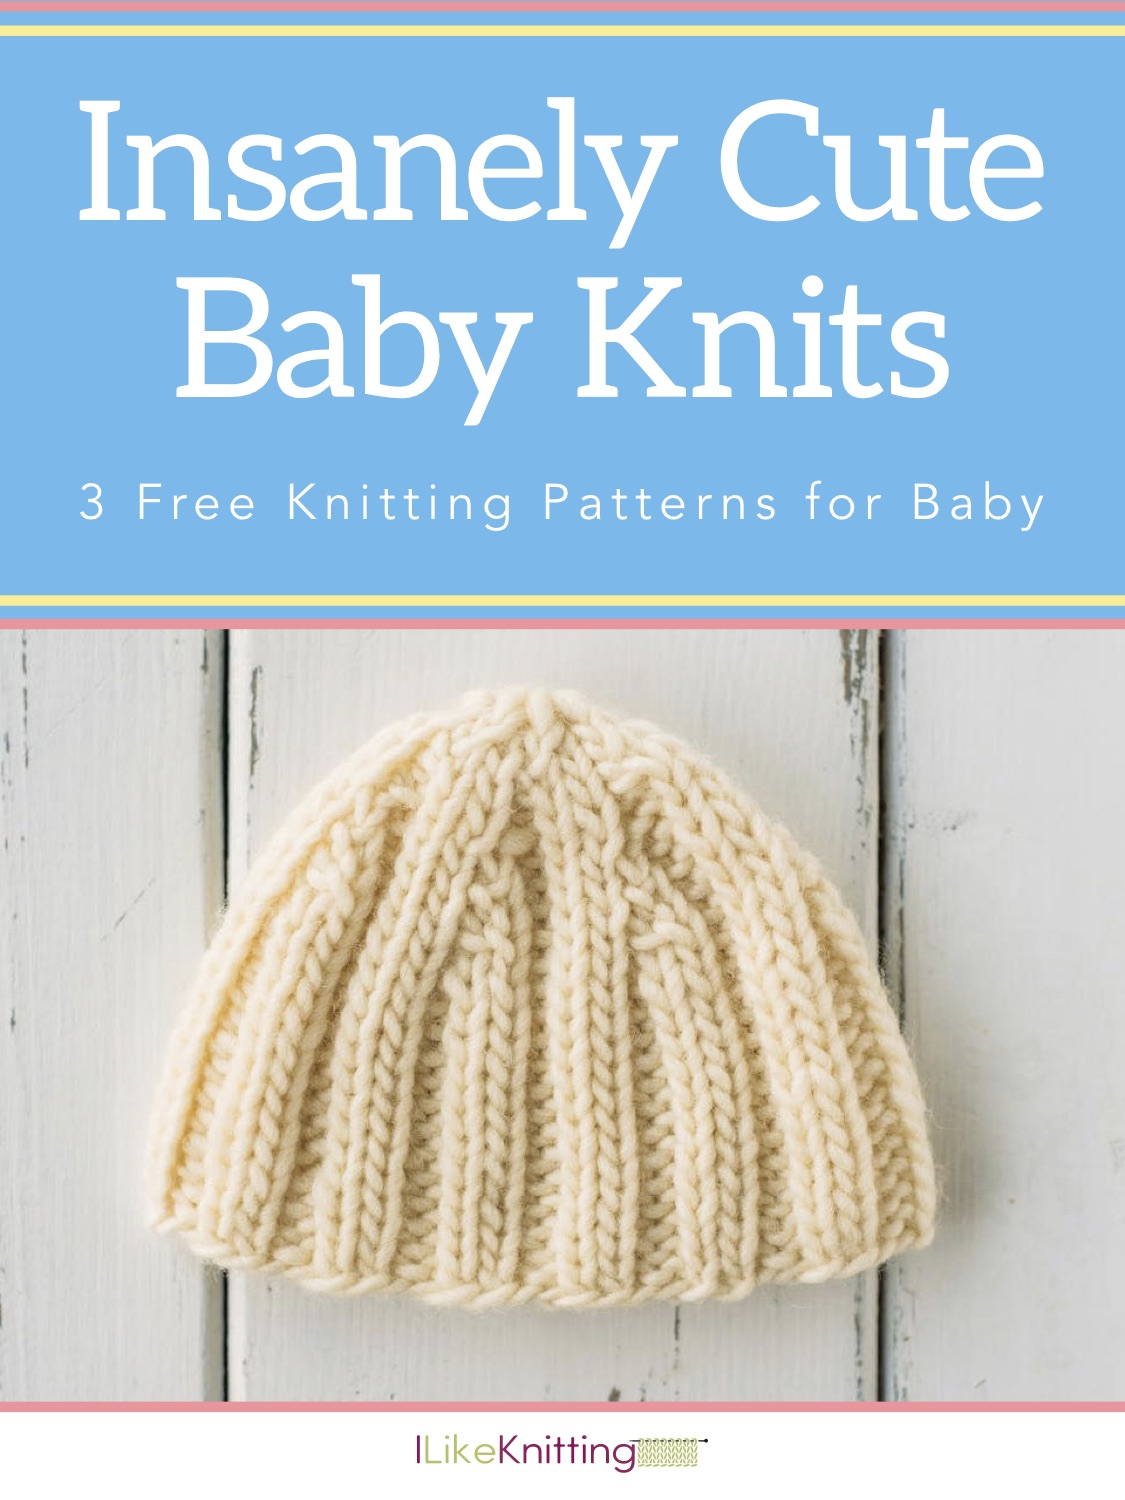 Knitting Pattern Free Download Insanely Cute Ba Knits 3 Free Knitting Patterns For Ba I Like